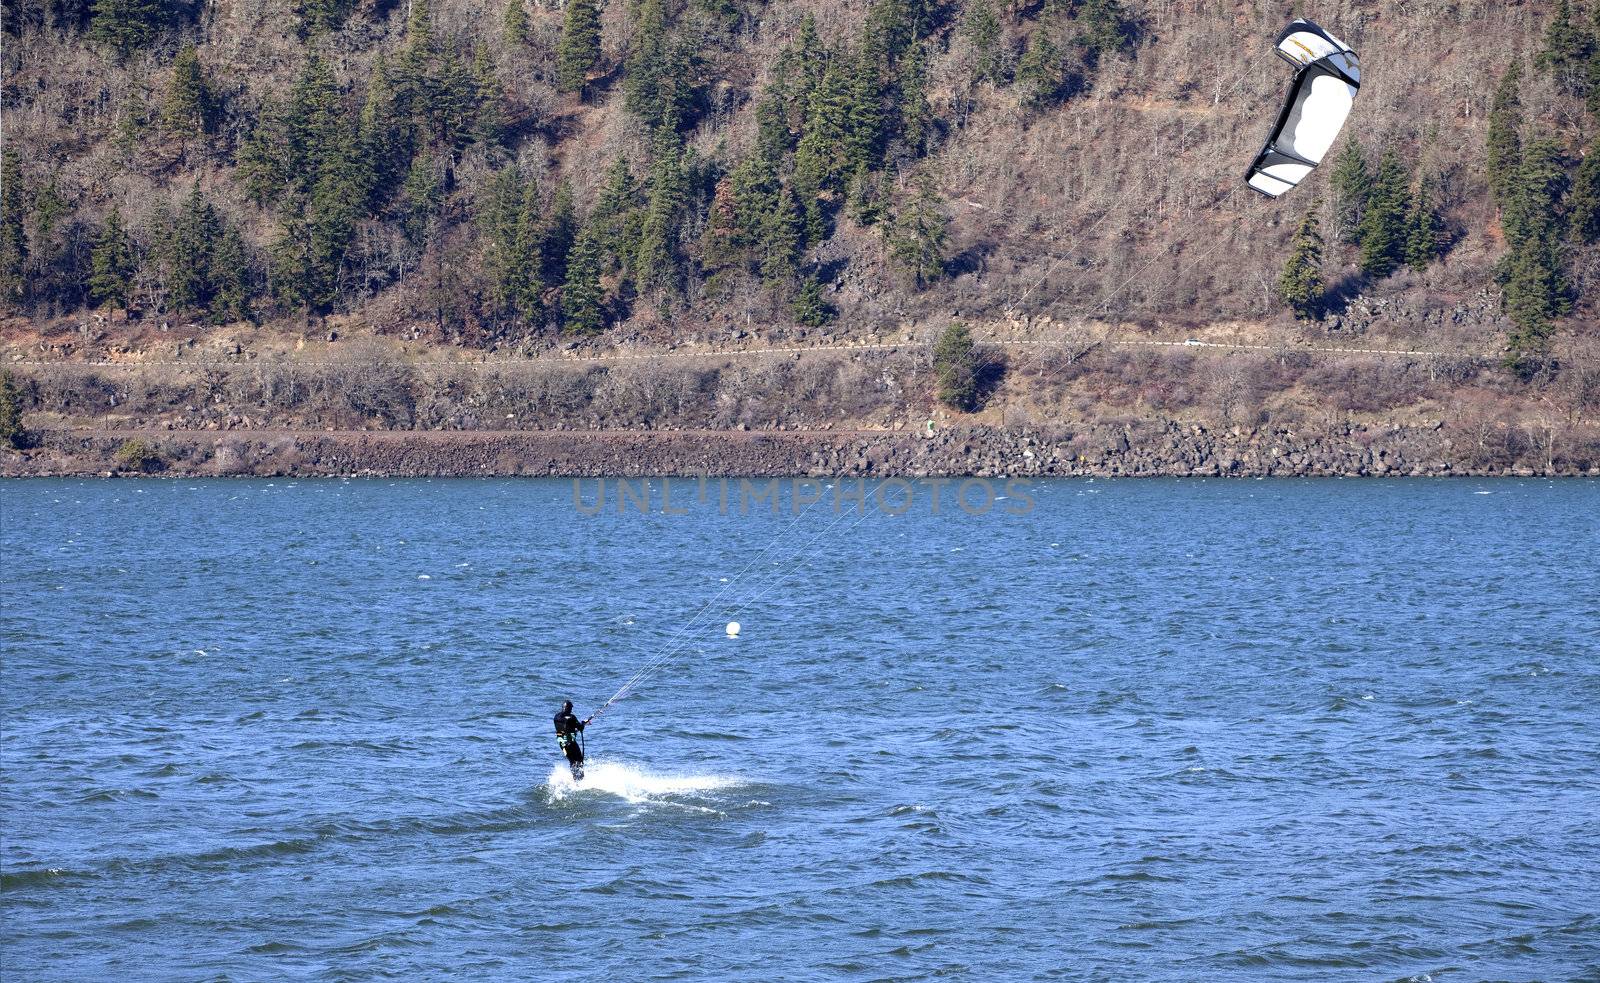 Wind surfers enjoying the pull, Columbia River Gorge OR.